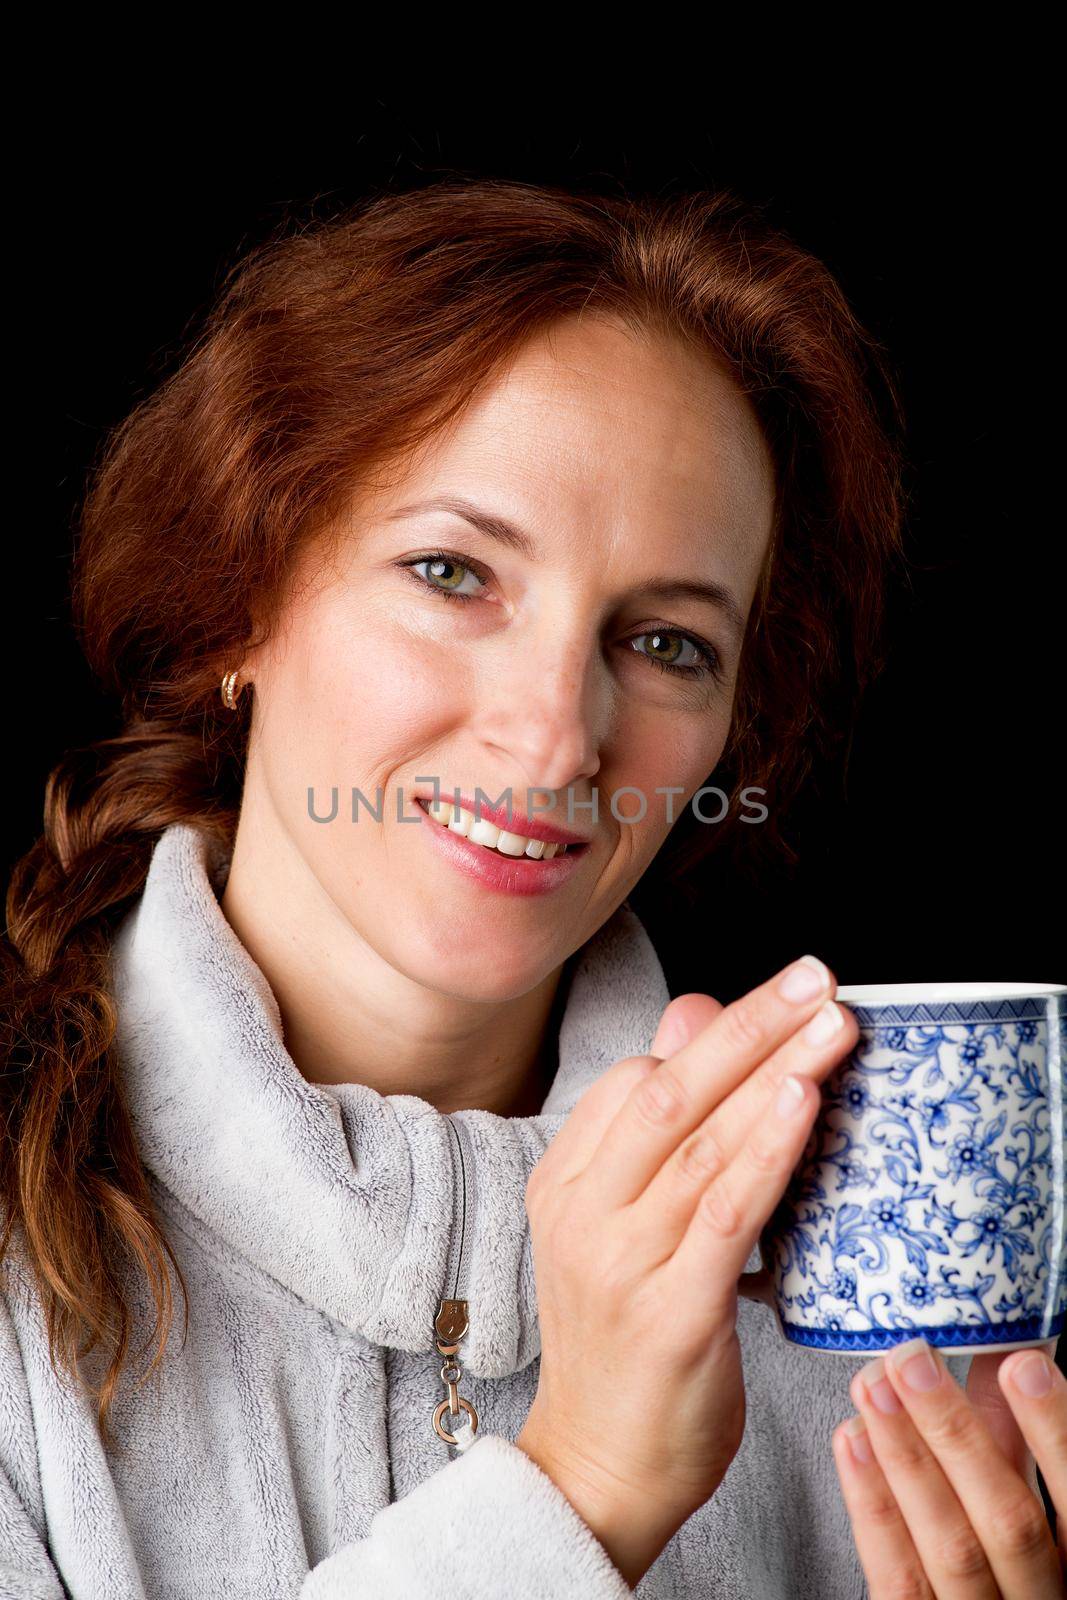 Woman holding mug in her hands. Cheerful brown haired woman in warm sweatshirt posing with cup of coffee or tea against black background. Female person enjoying of hot drink in the morning